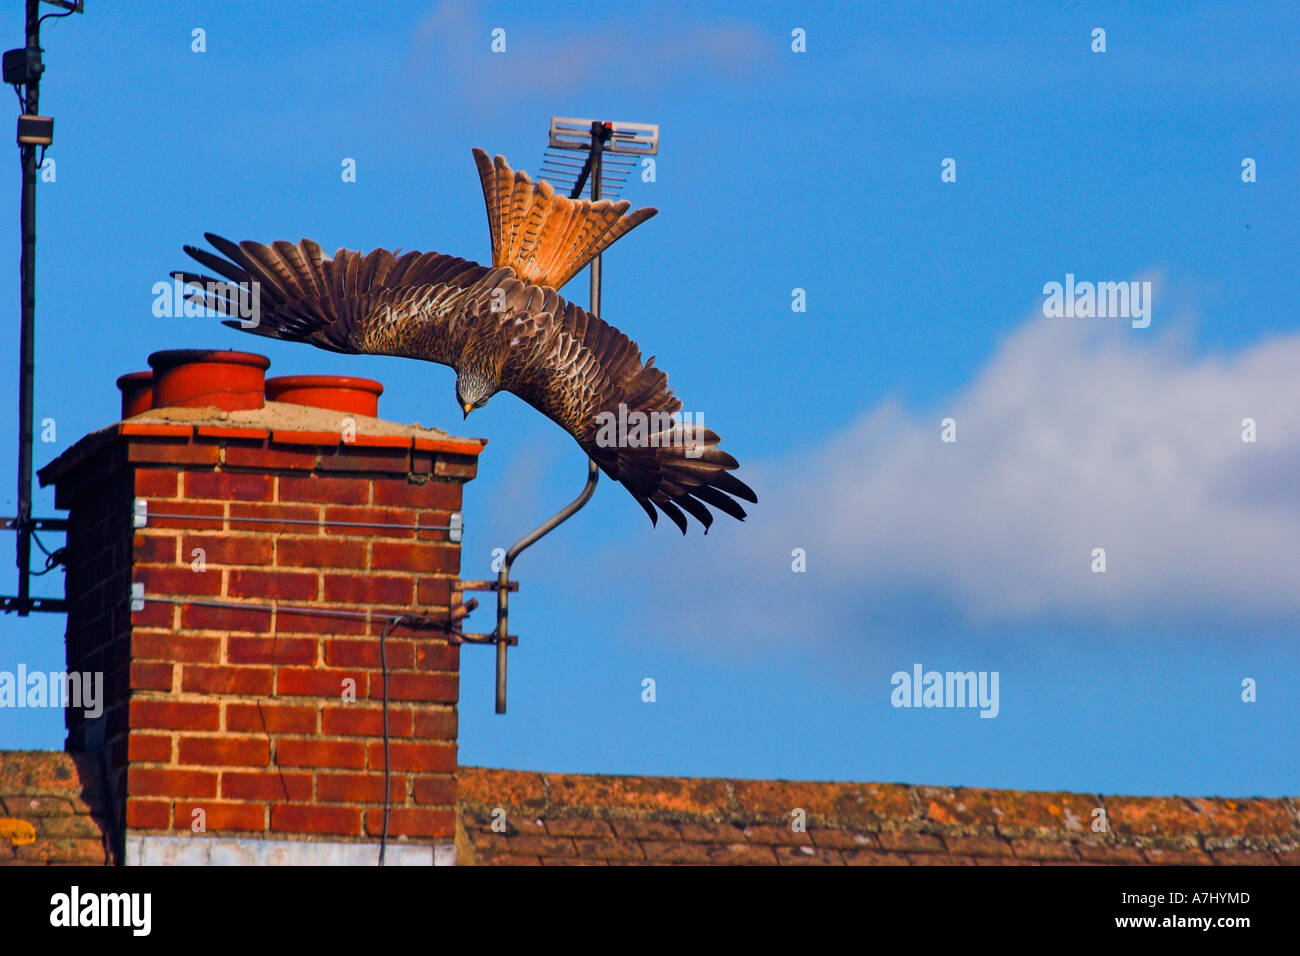 Red Kite diving past chimney Stock Photo